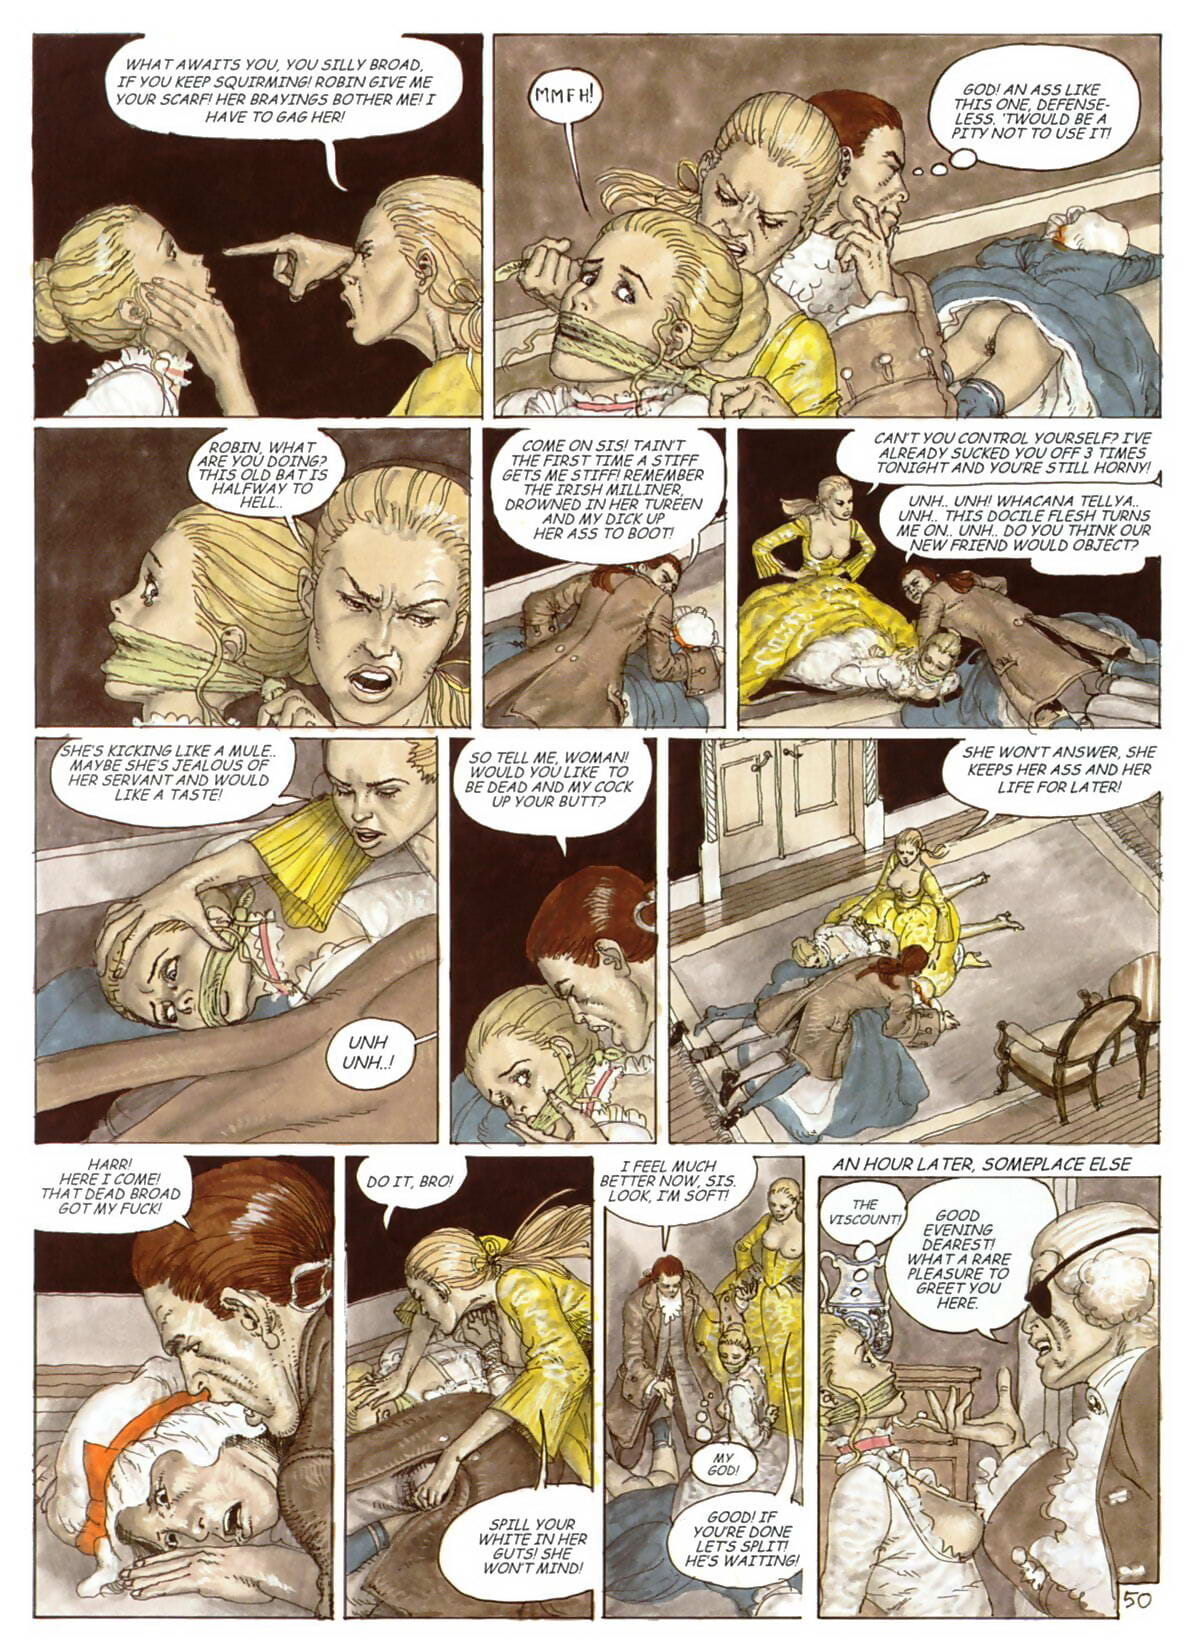 The Troubles of Janice - Volume #3 - part 2 page 1